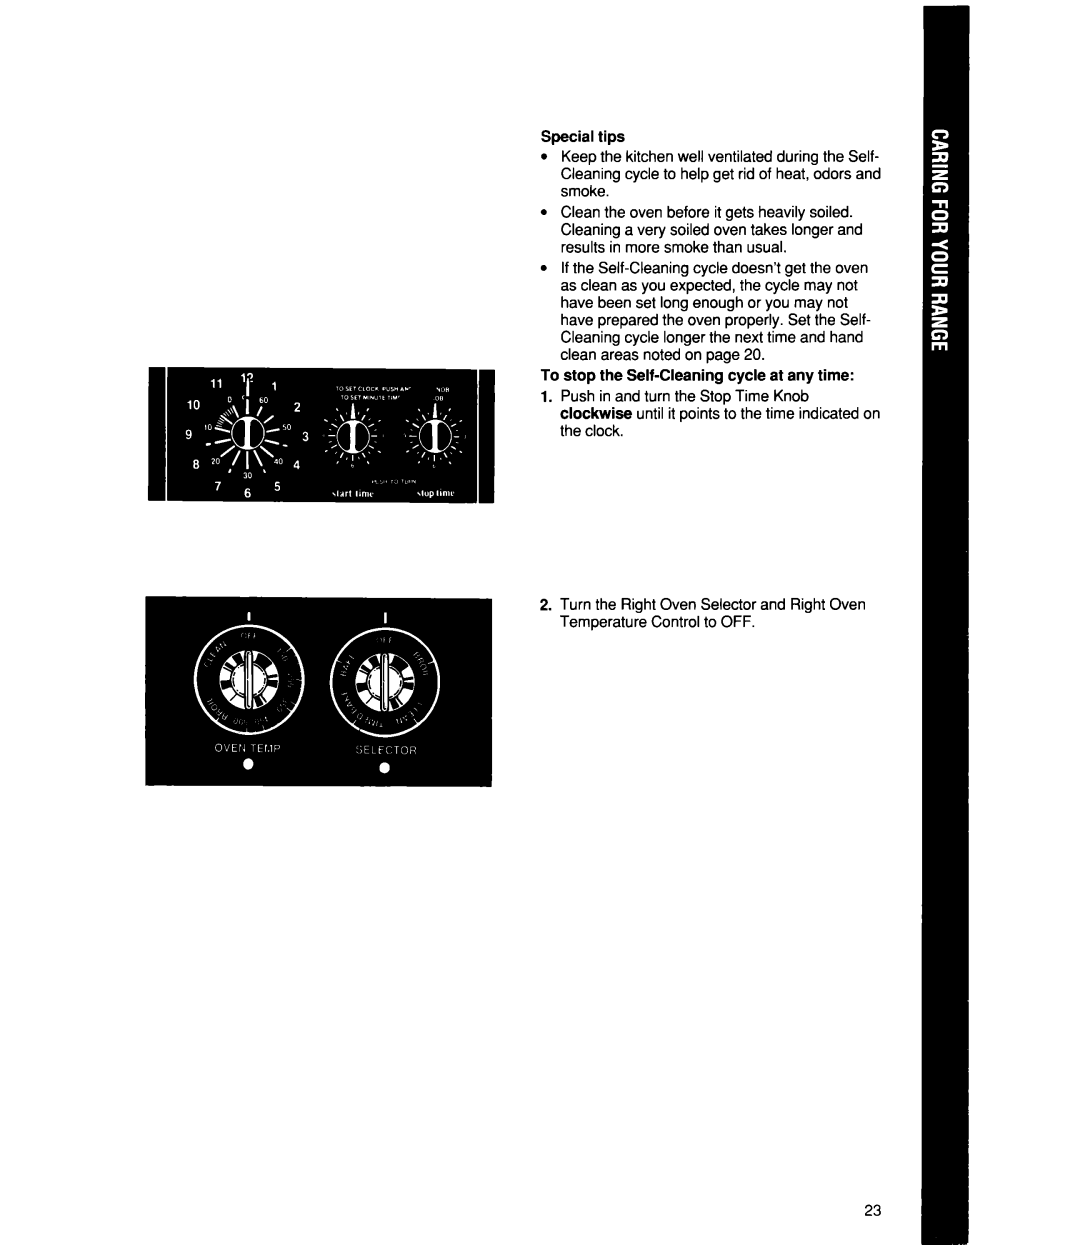 Whirlpool RF4700XW manual Special tips, To stop the Self-Cleaningcycle at any time 